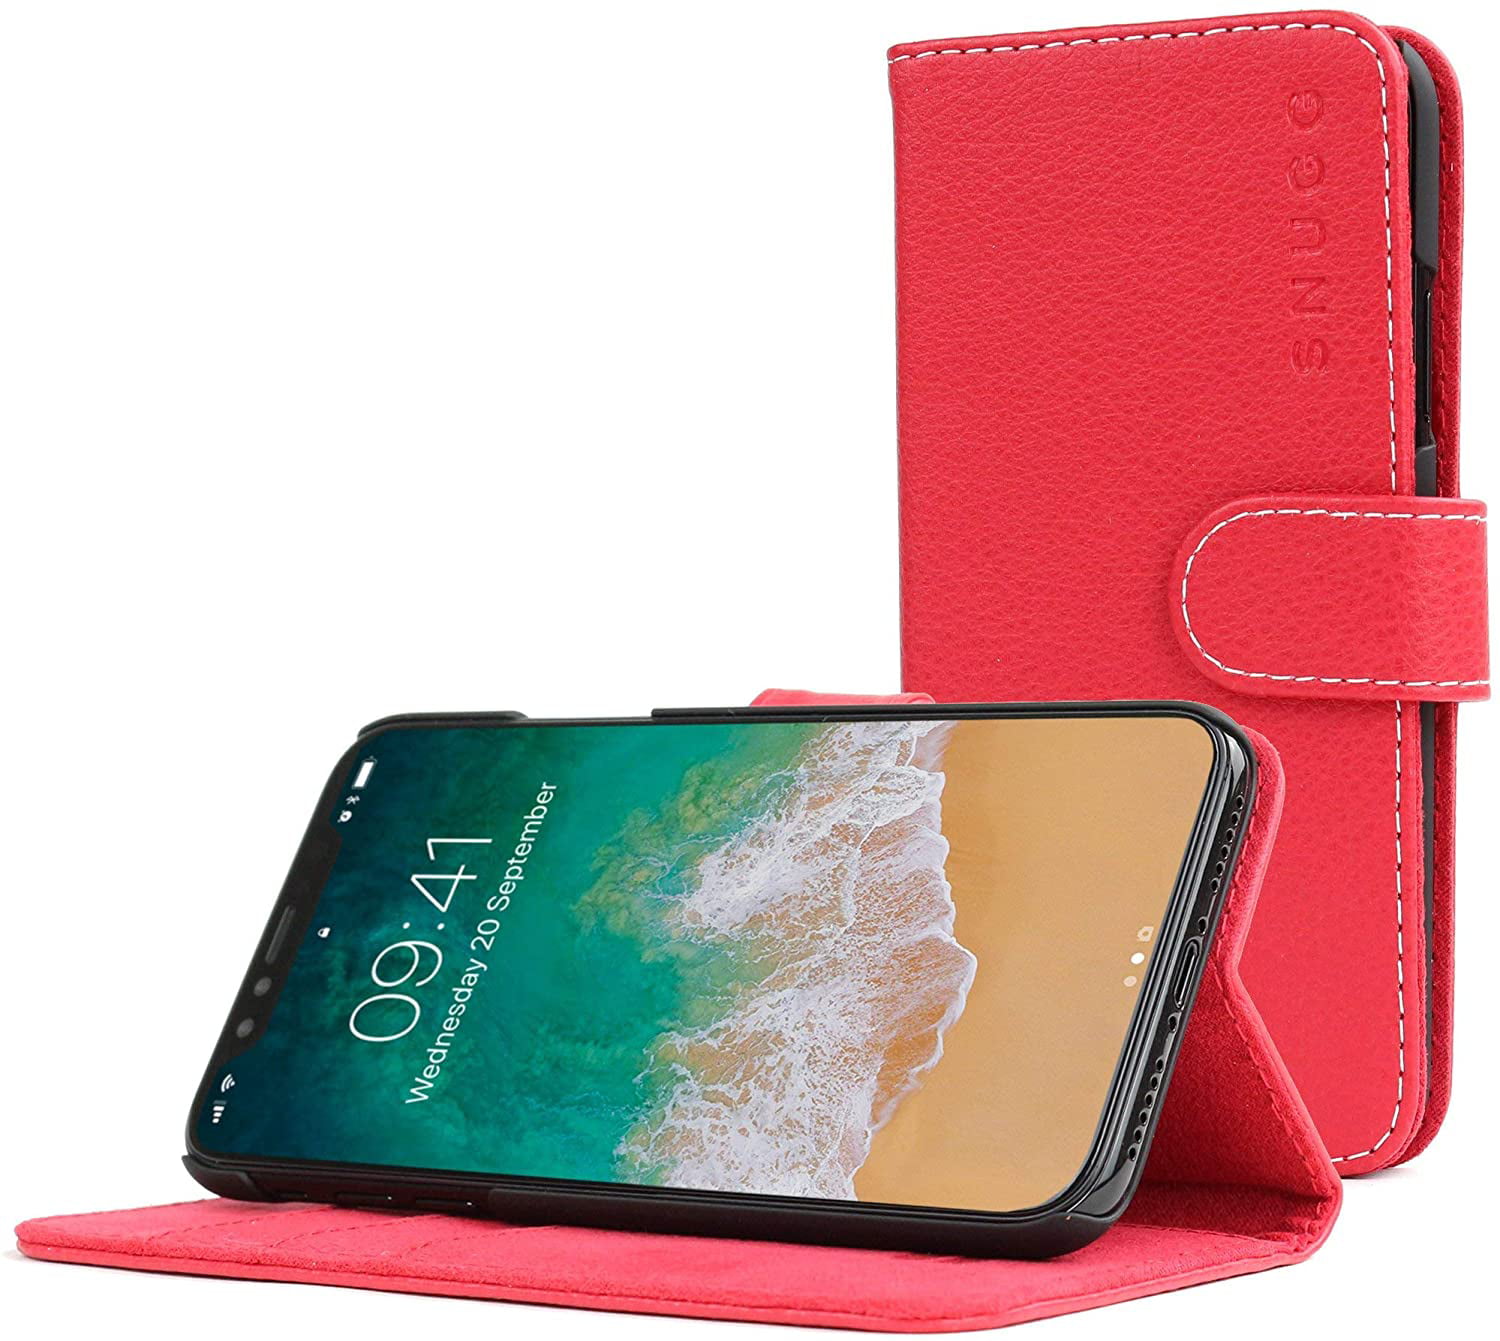 vonk Bedoel repertoire iPhone XR Wallet Case – Leather Card Case Wallet with Handy Stand Feature –  Legacy Series Flip Phone Case Cover in Red - Walmart.com